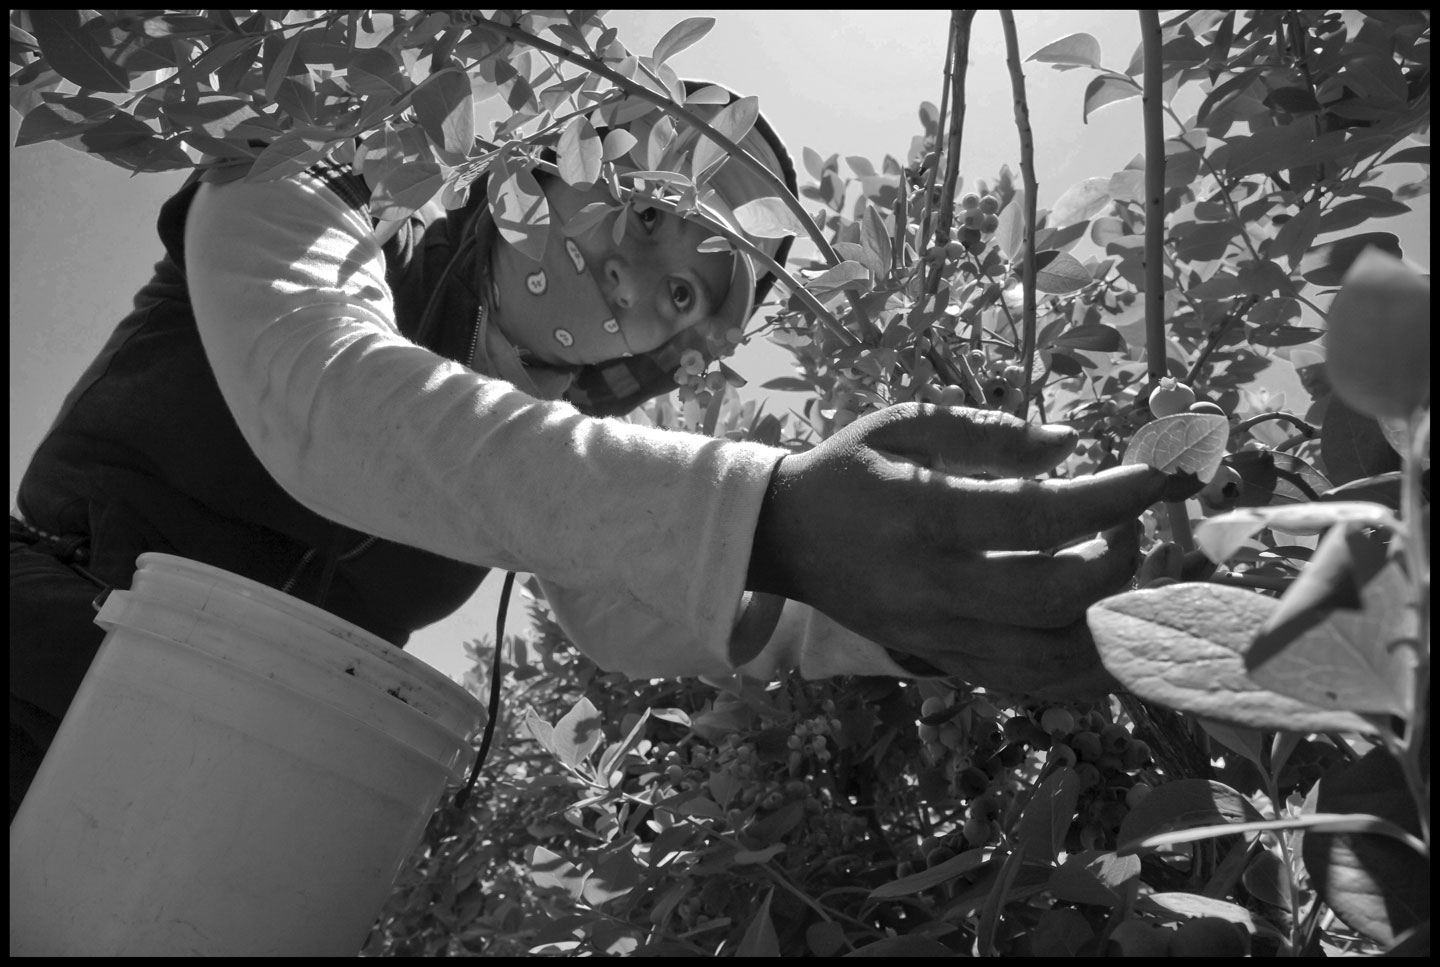 Lorena Hernandez, a 20-year-old farm worker and single mother of a 4-year-old girl, picks blueberries in a field in California's San Joaquin Valley. Workers are paid by $8 for each 12-pound bucket they pick.